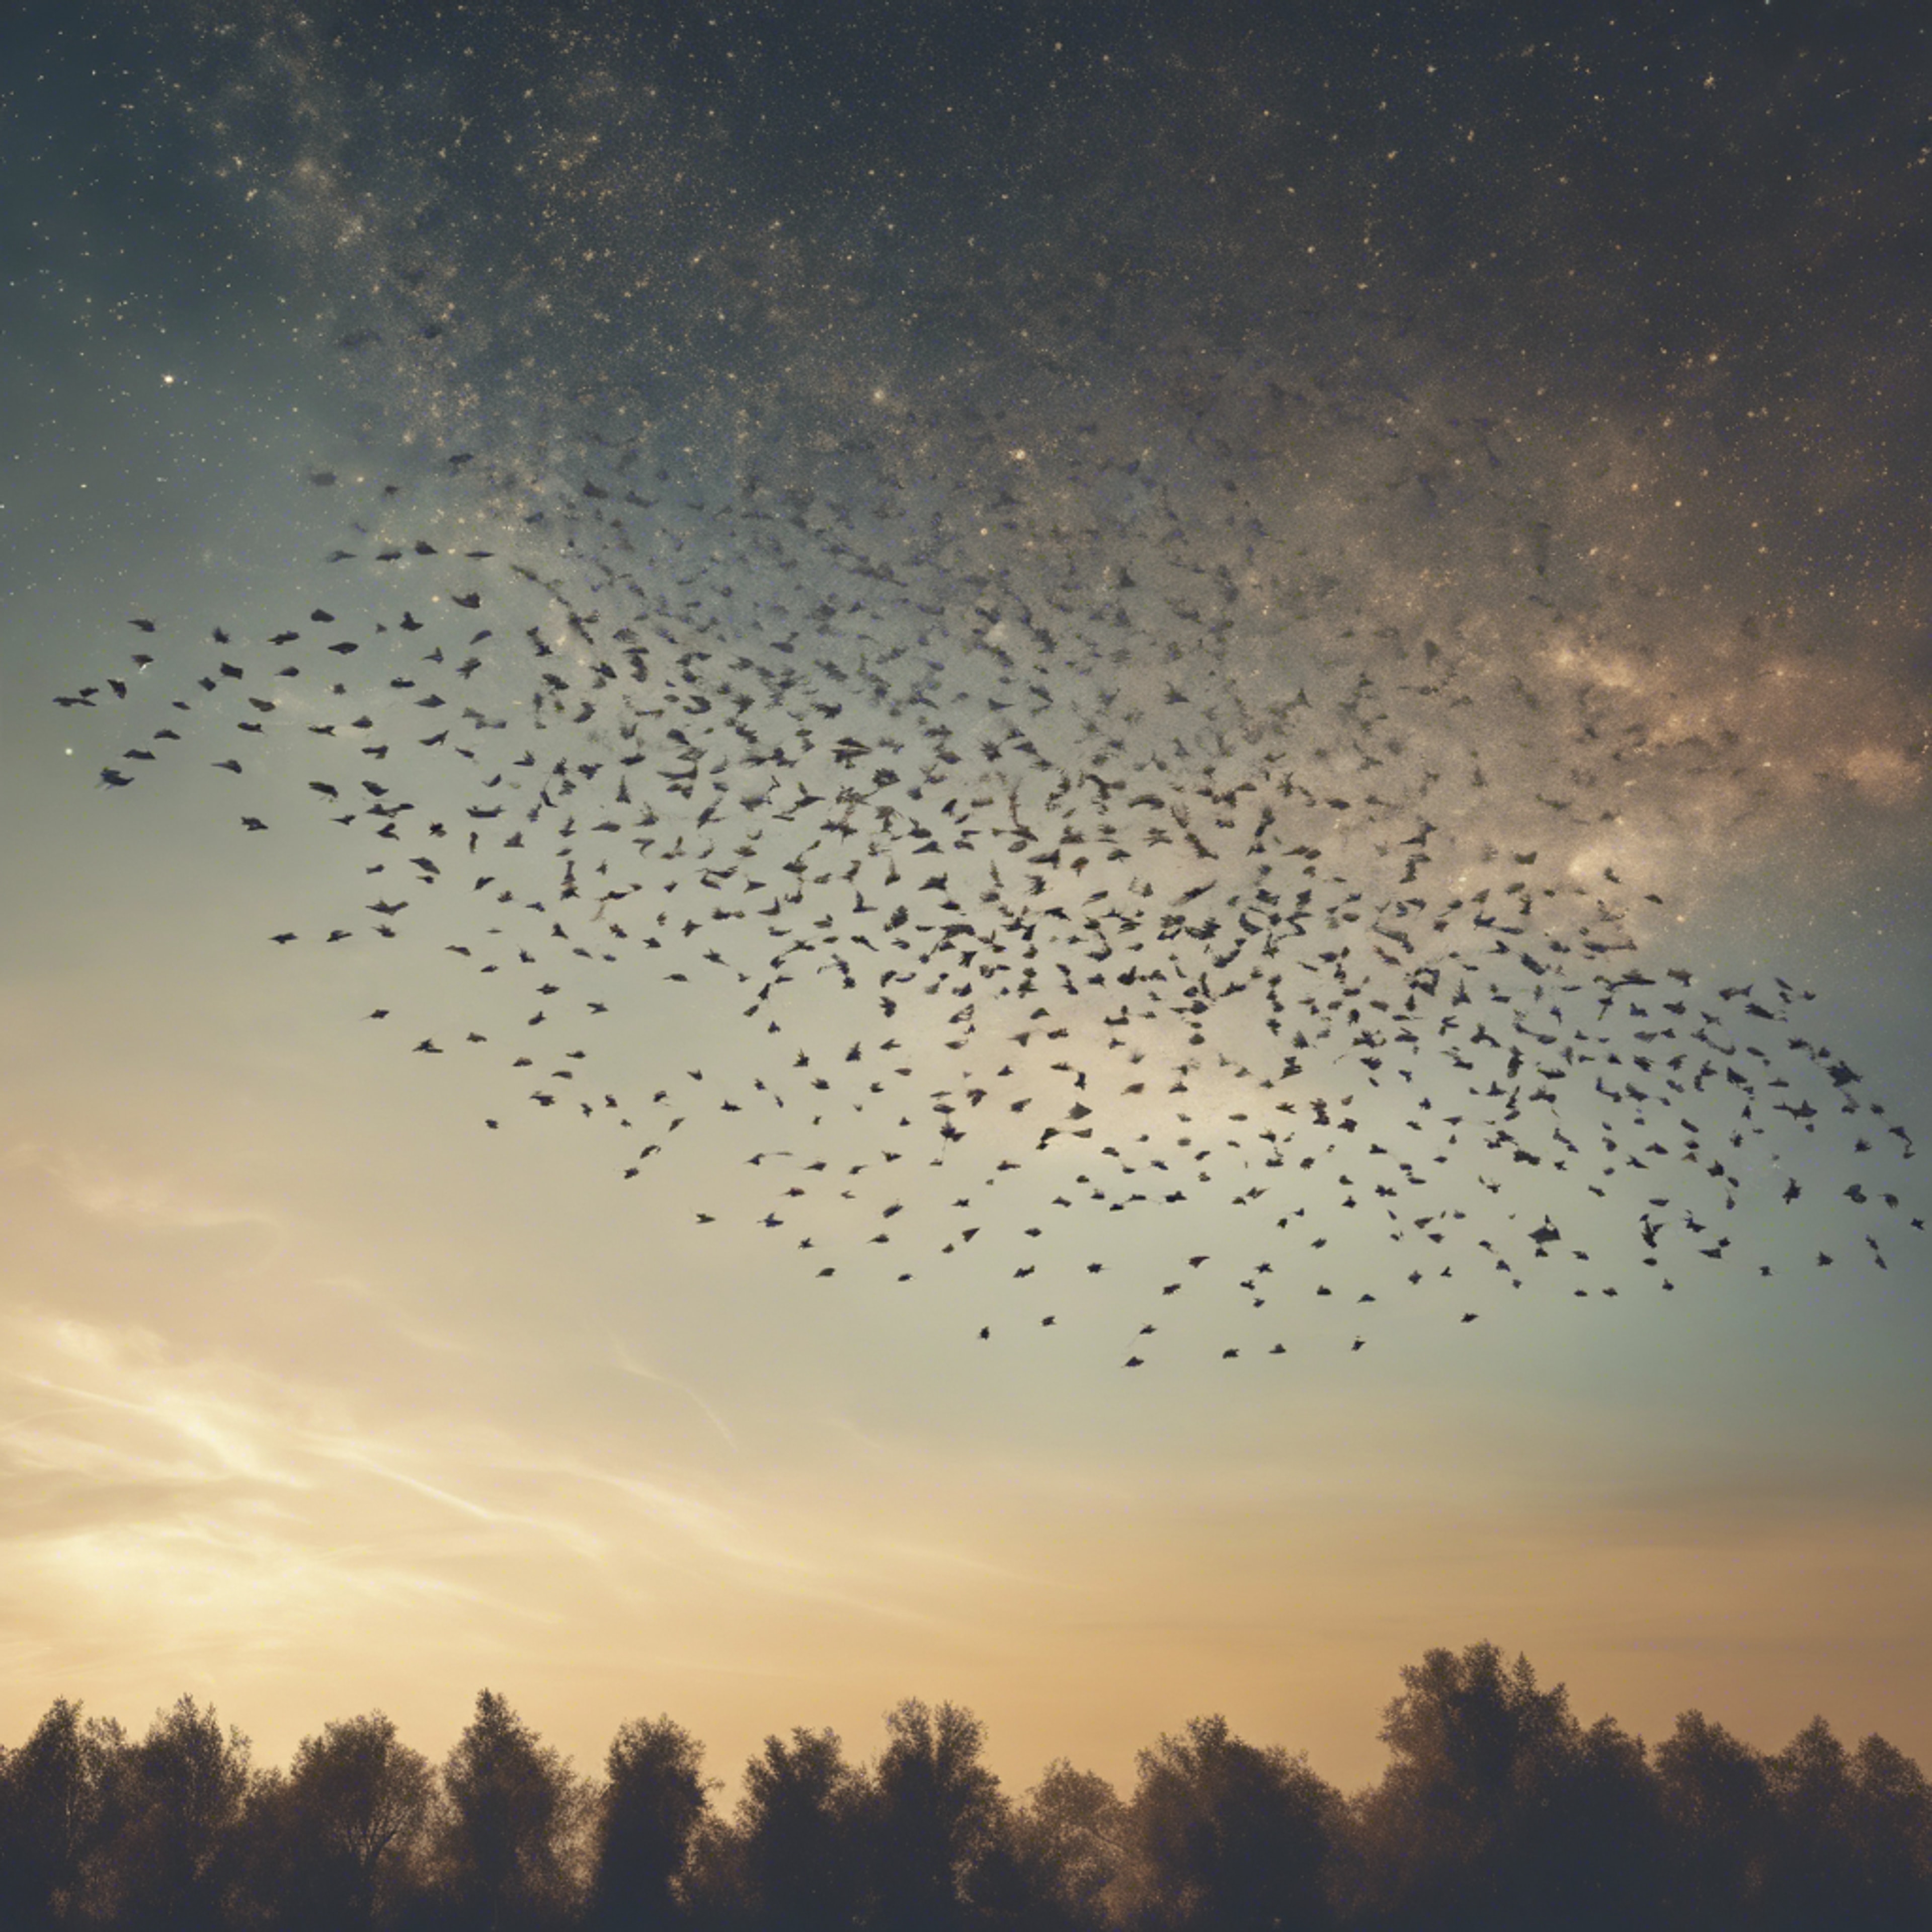 A flock of birds migrating in a formation under the beautiful canvas of the star-filled sky.壁紙[484e39501ed147fa9155]